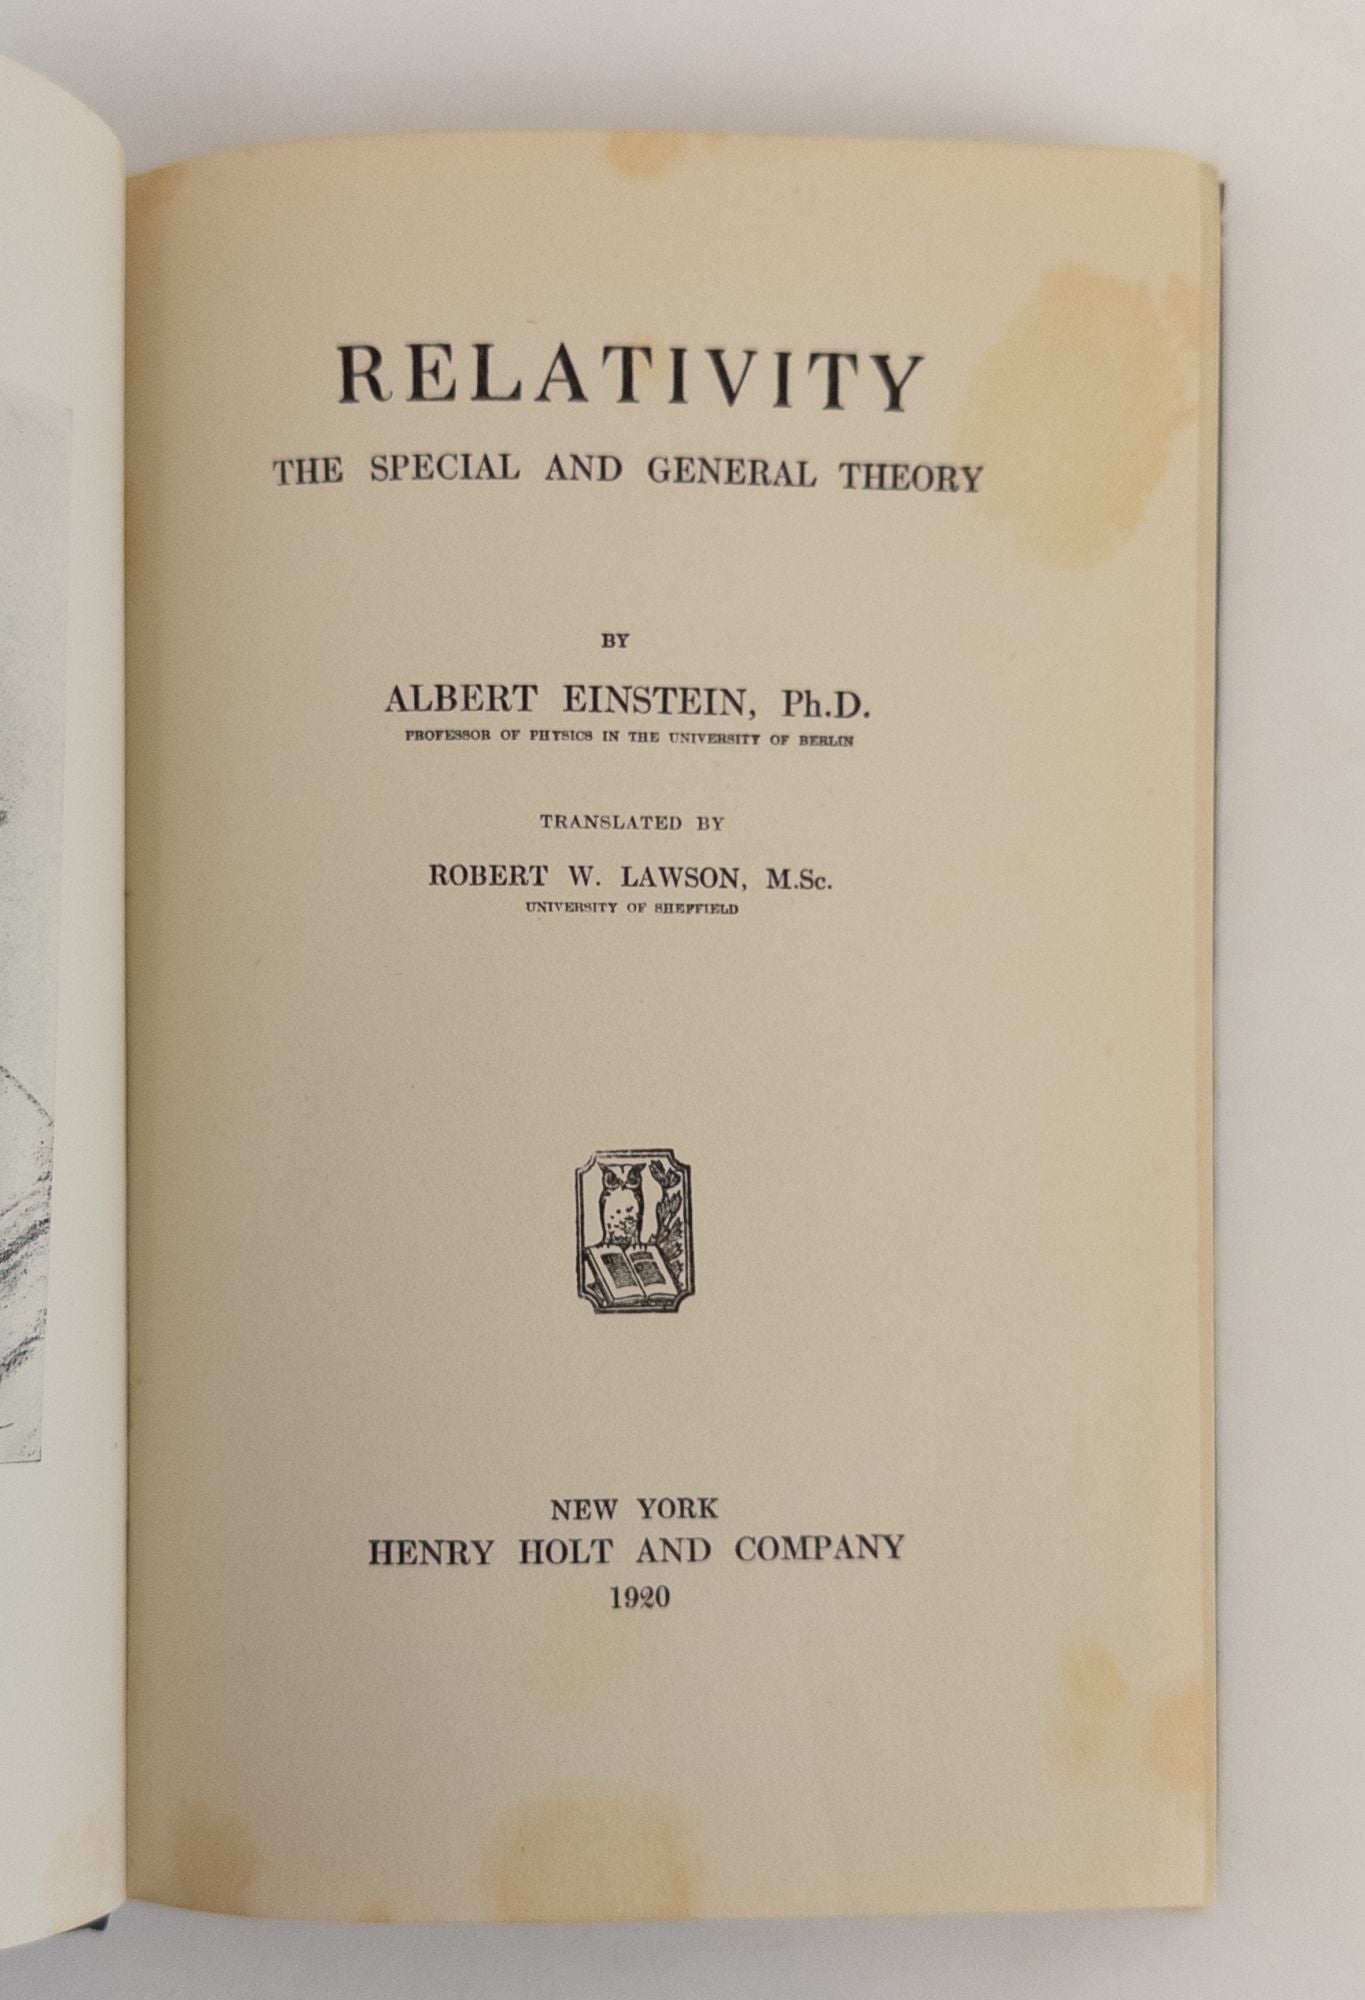 Product Image for RELATIVITY - THE SPECIAL AND GENERAL THEORY